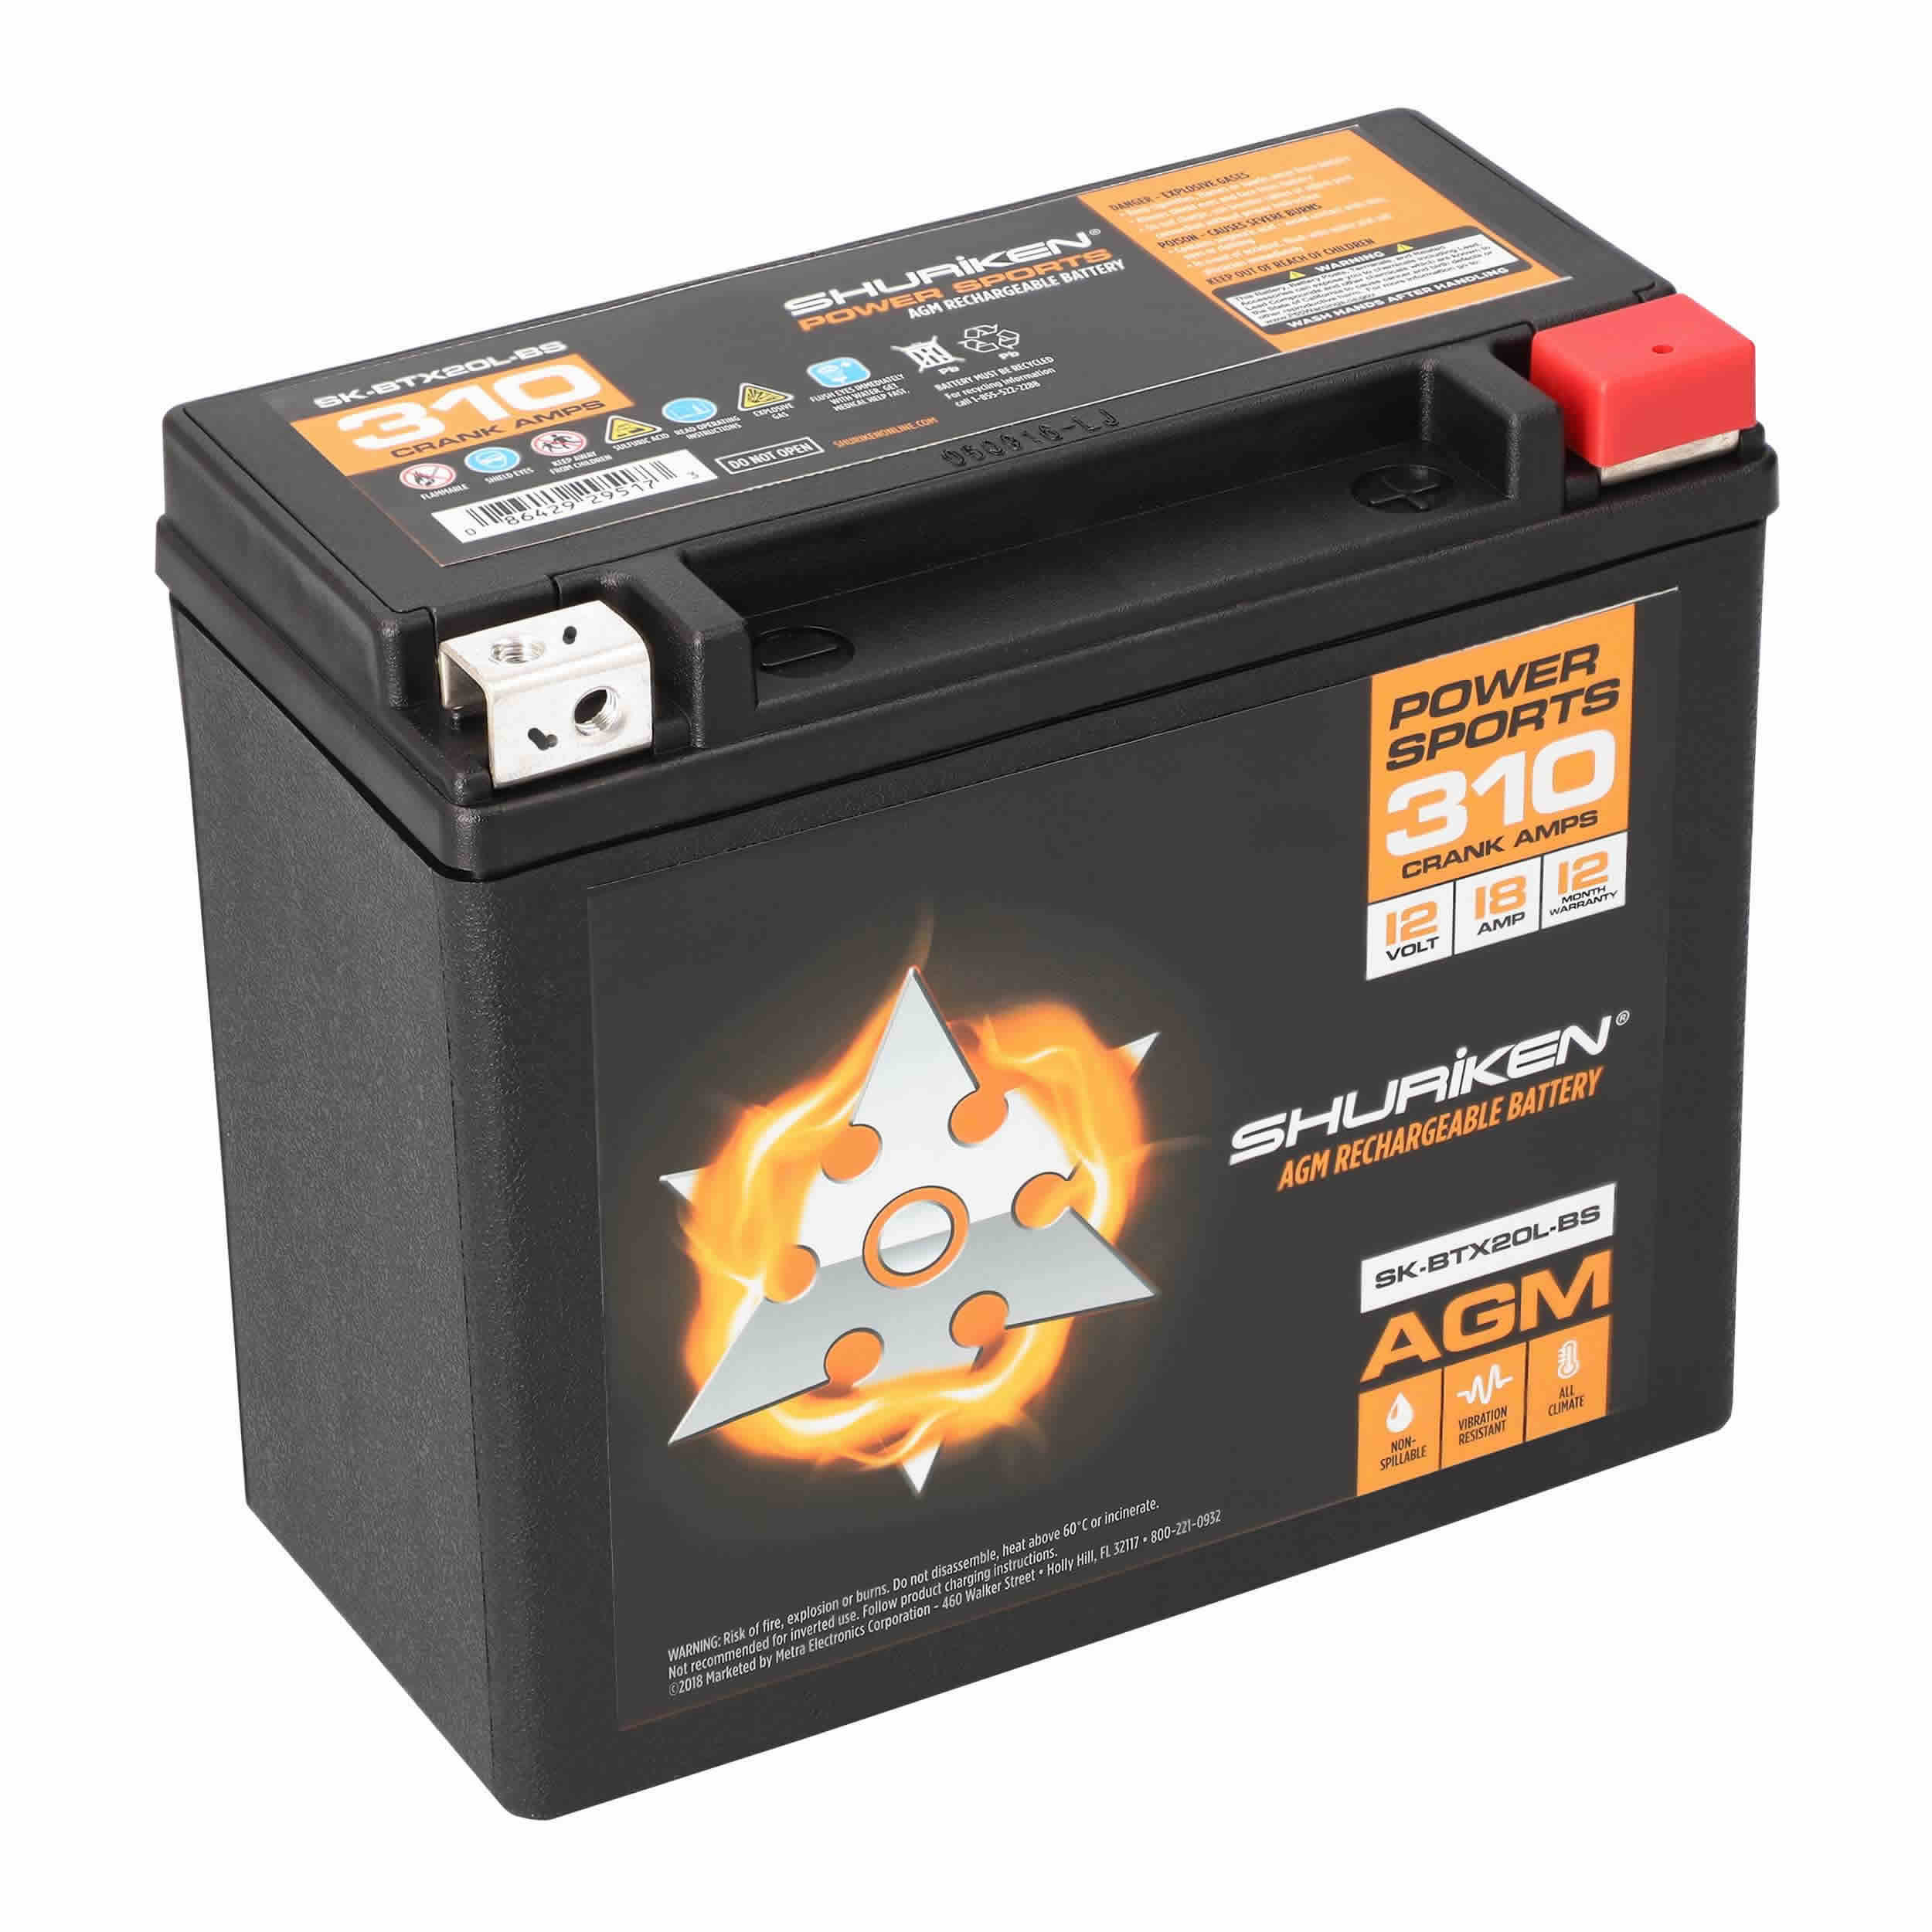 310 Crank AMPS 18AMP Hours AGM Battery